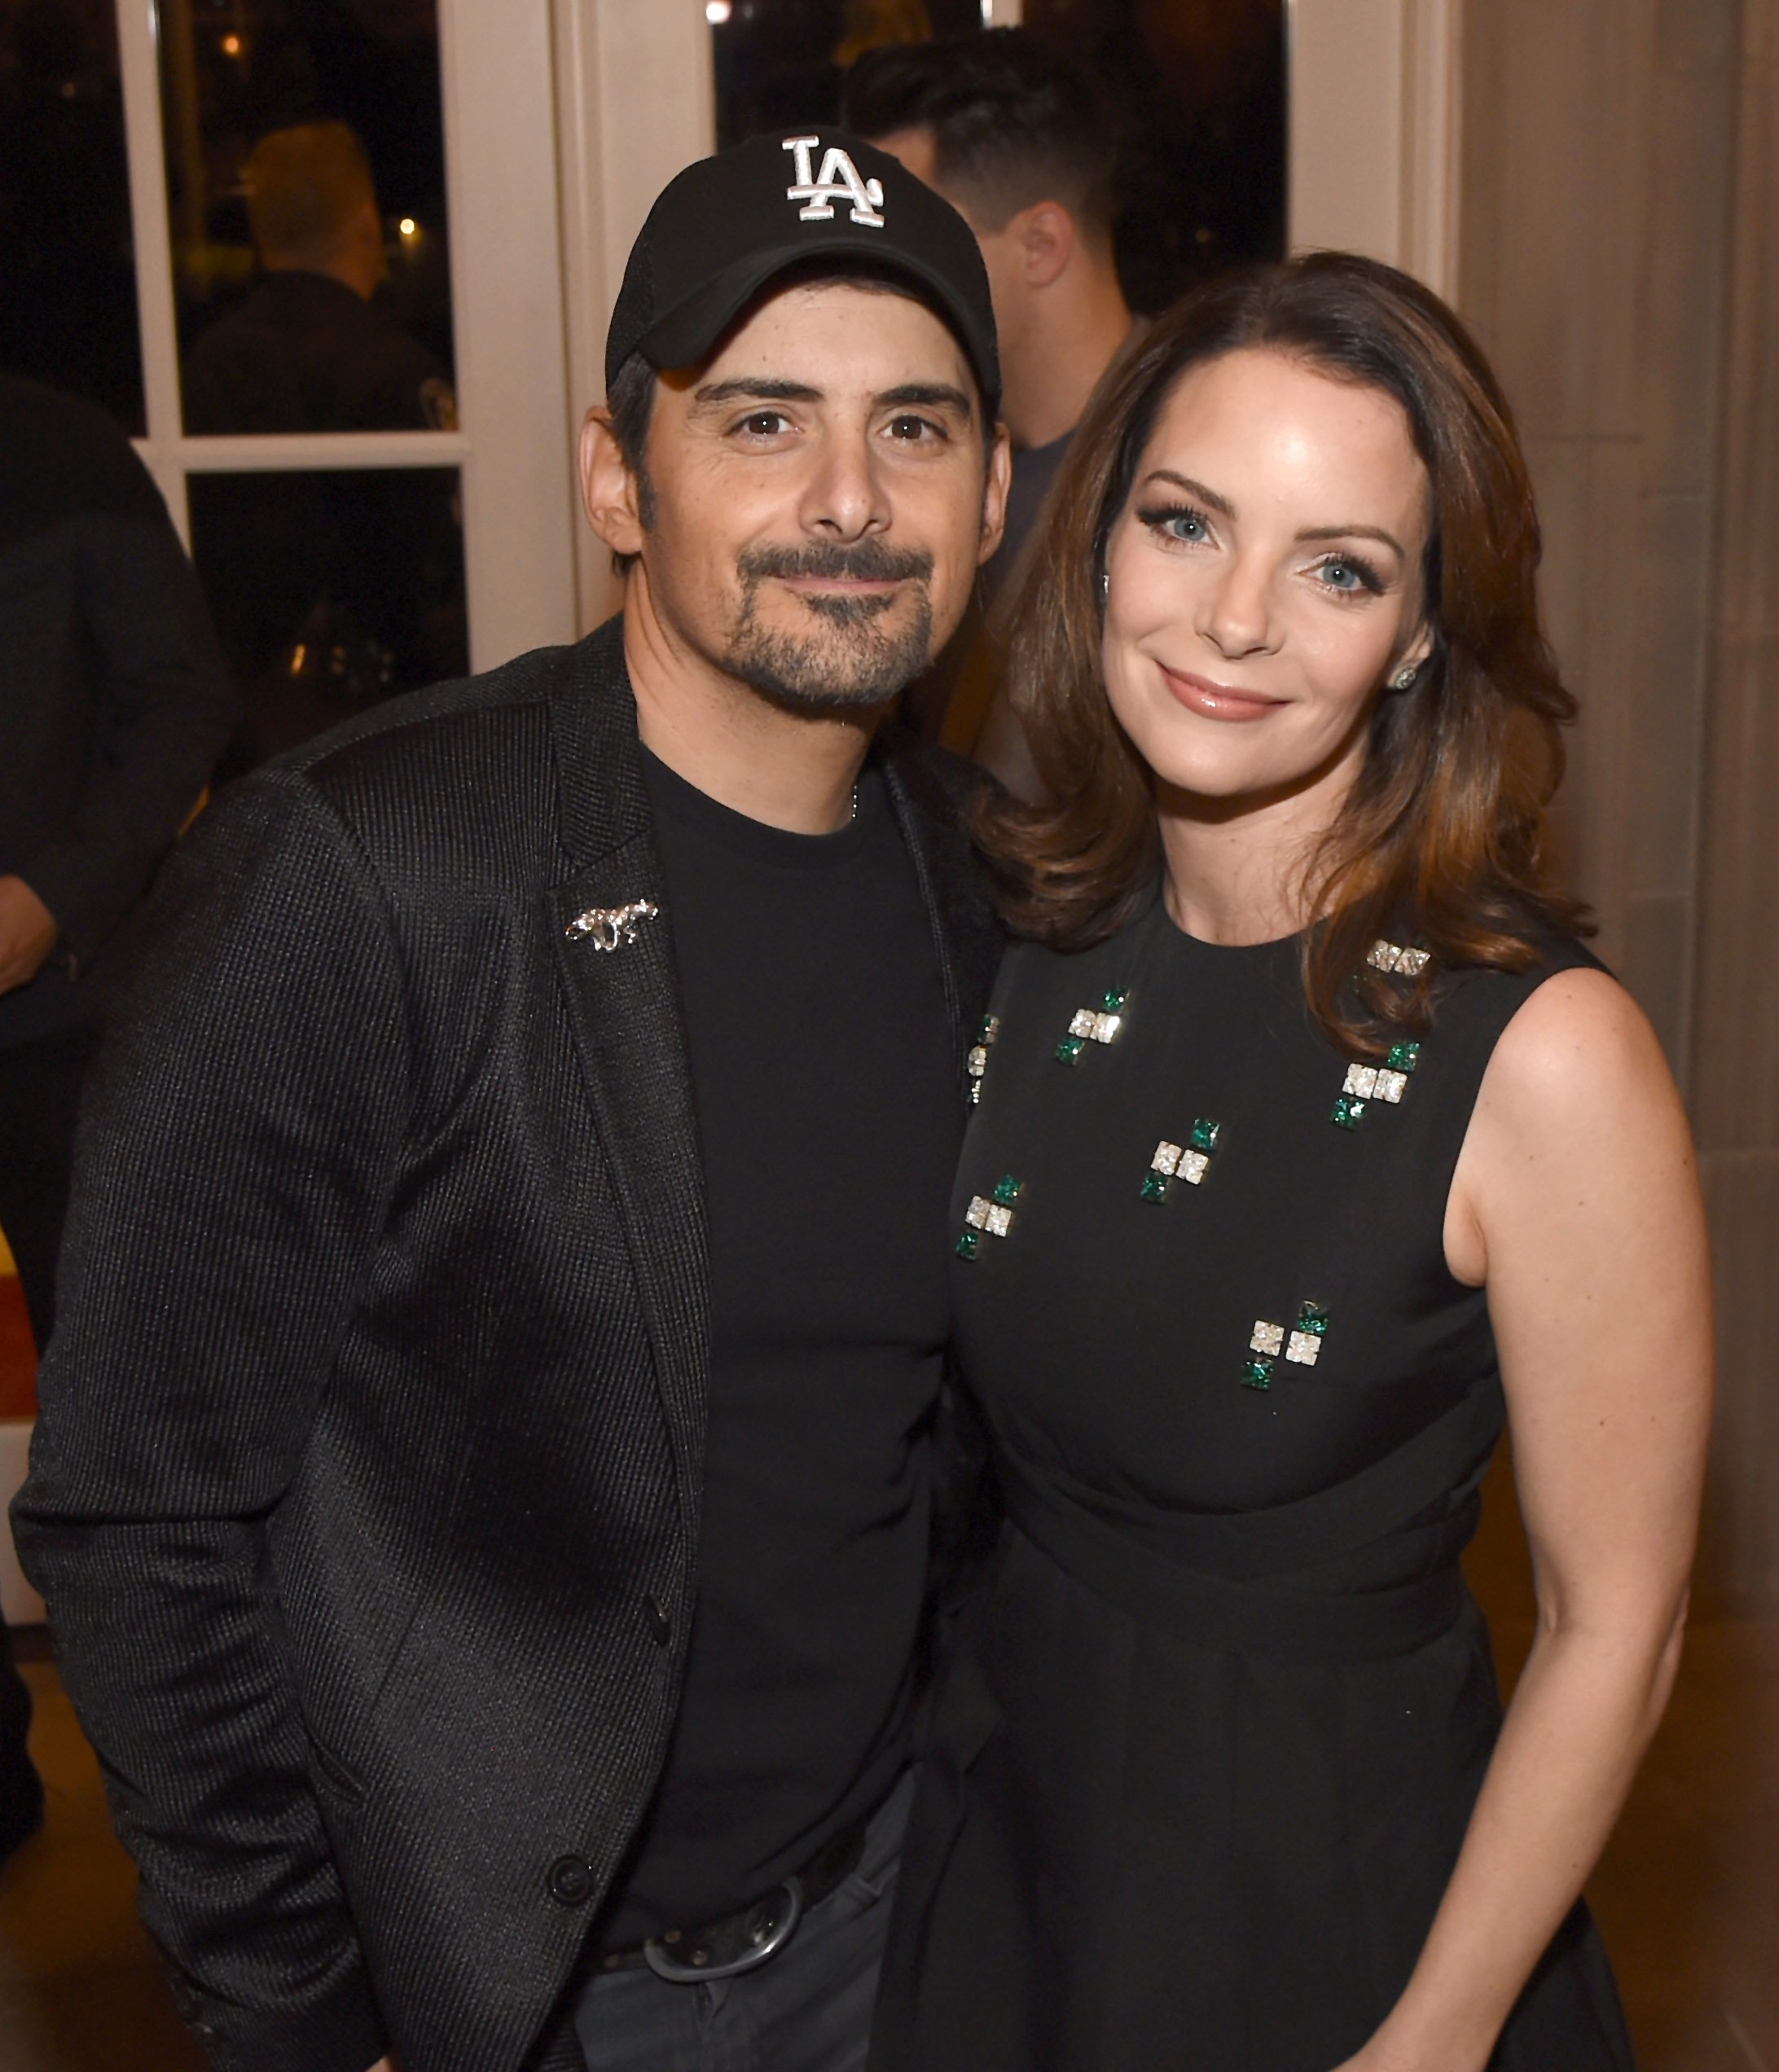 Brad Paisley and Kimberly Williams-Paisley attend ACM Lifting Lives on November 16, 2017 in Nashville, Tennessee | Photo: Getty Images